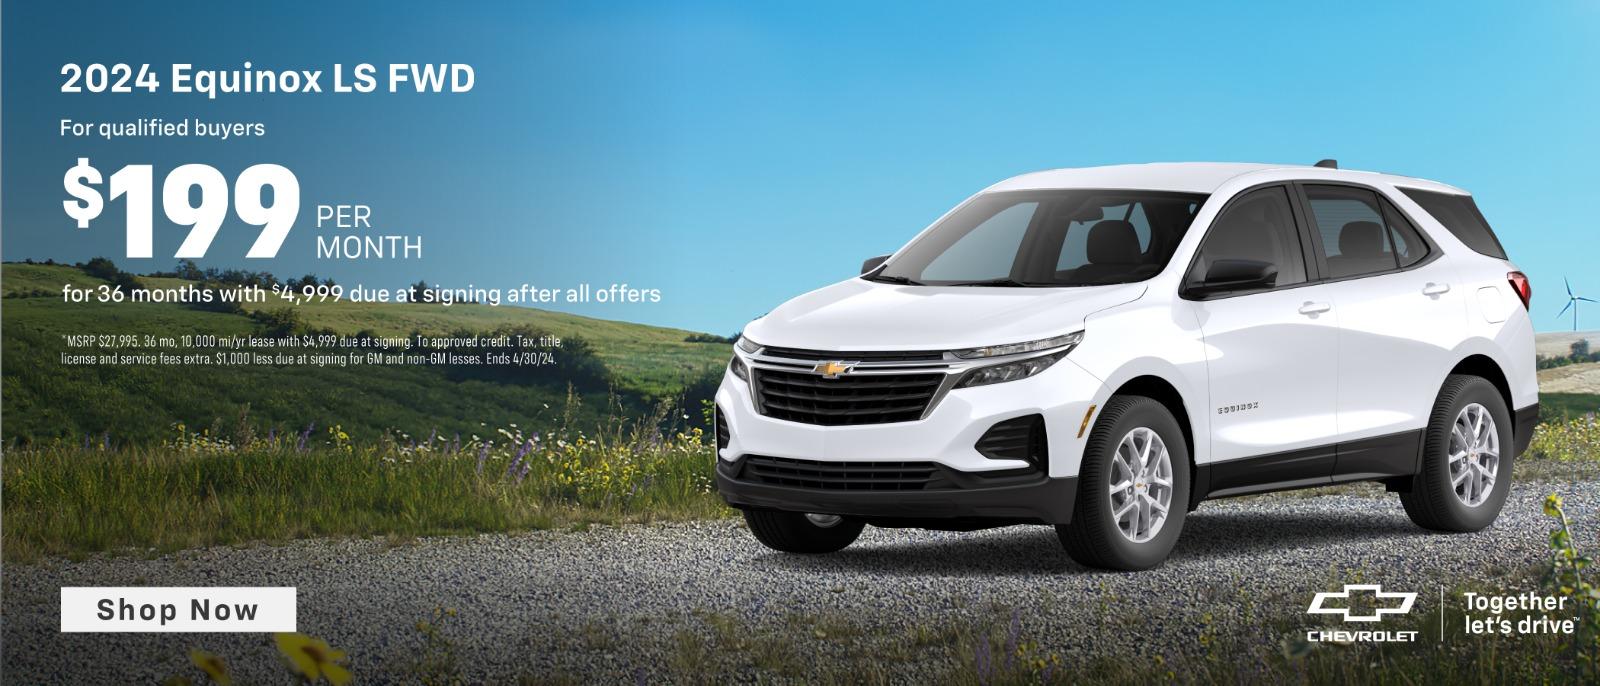 2024 Chevy Equinox lease for $199 per month for 36months